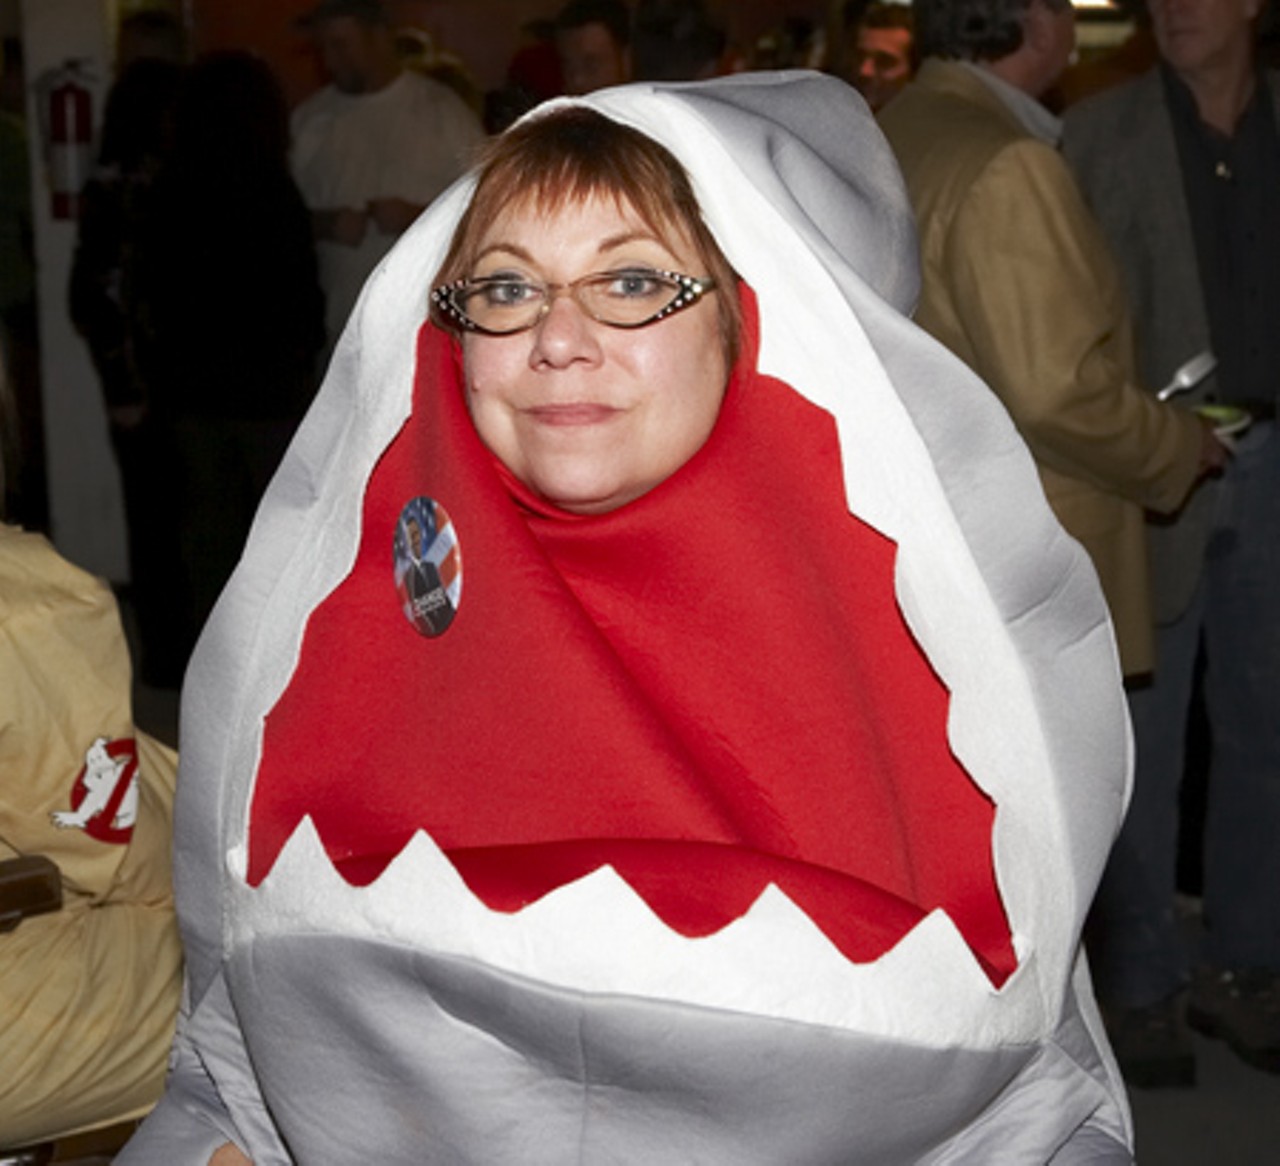 Jaws  was showing her support for Obama.